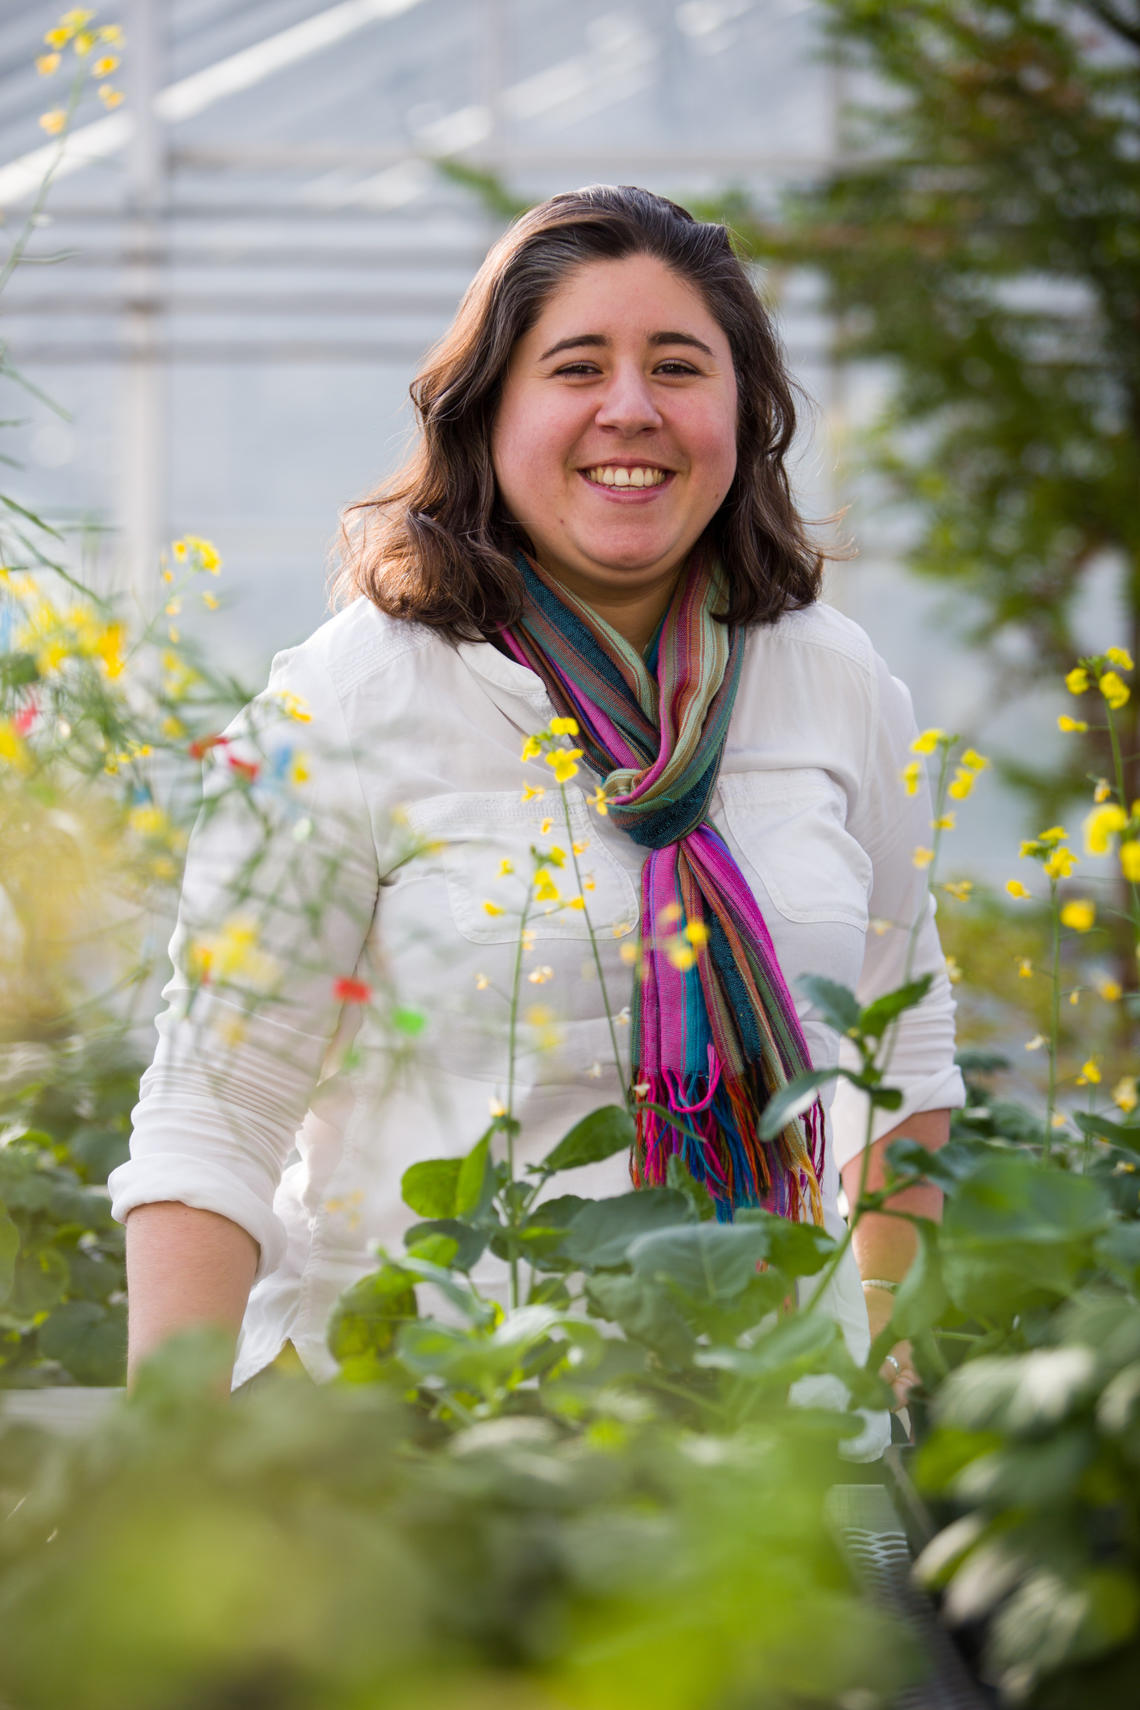 “Plants are amazing. They don’t move, they can’t walk, so they have to be creative in having a lot of mechanisms to survive,” says University of Calgary researcher Sabine Scandola, who performed all the experiments in the study with Marcus Samuel.